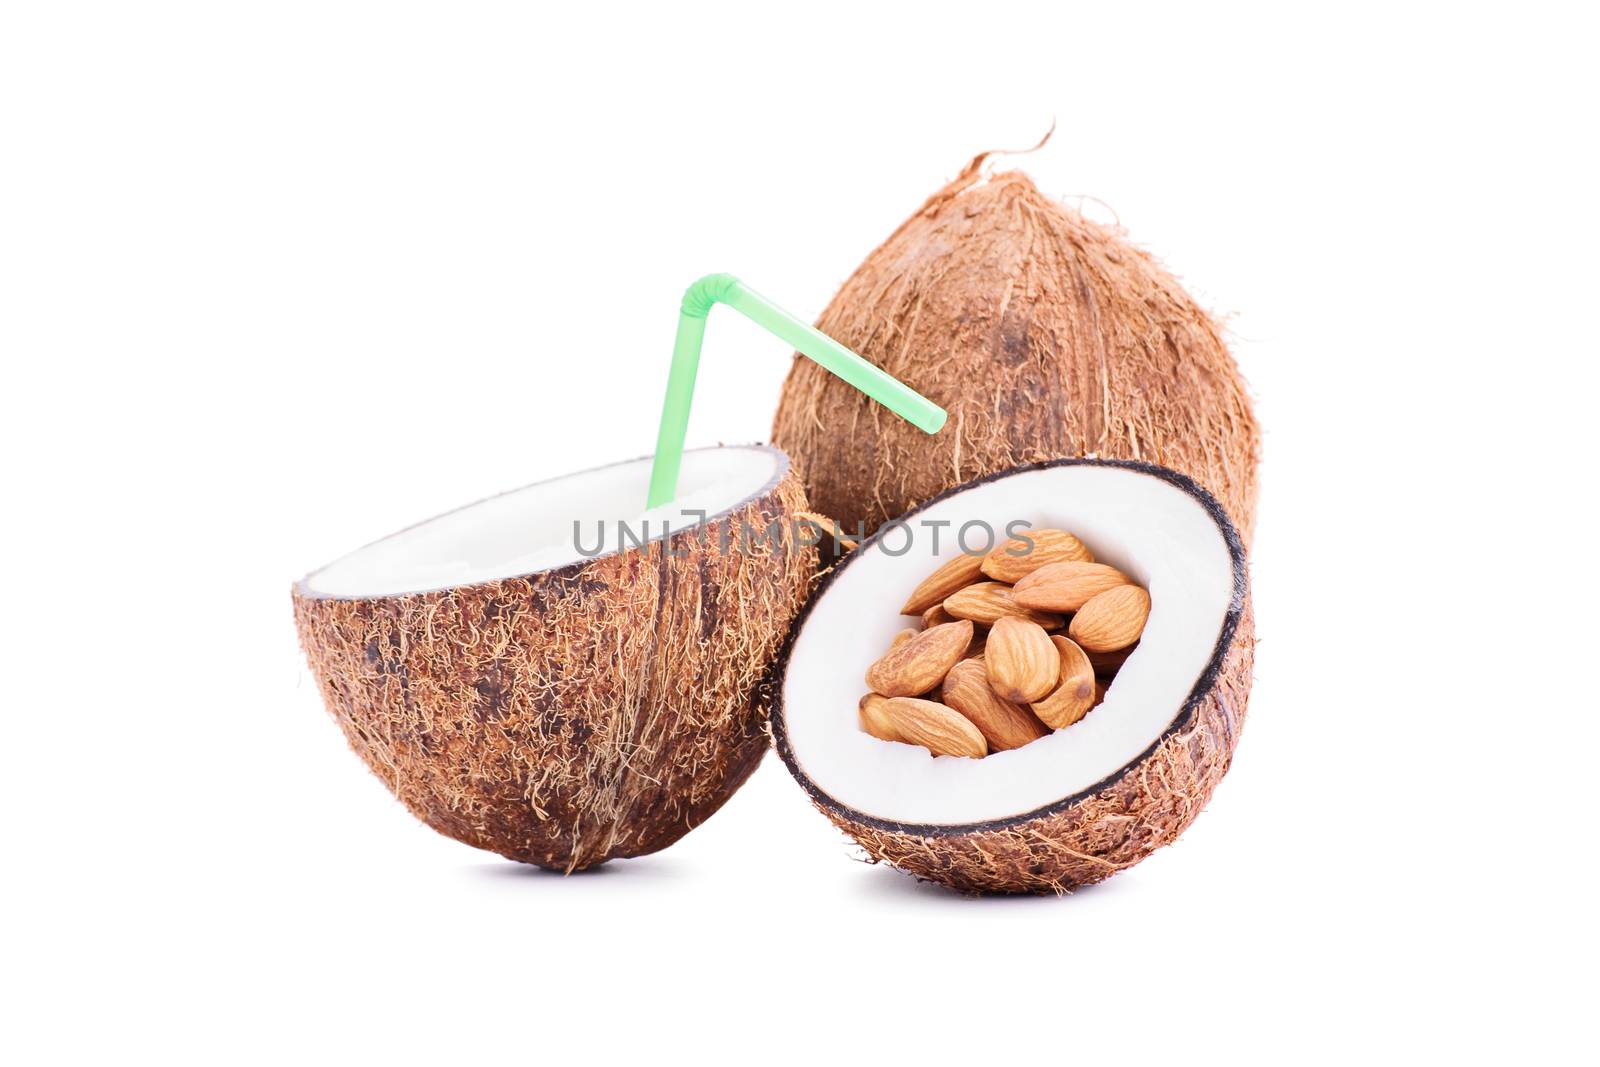 Slices coconut filled with almonds and coconut milk with a straw, isolated on white background.